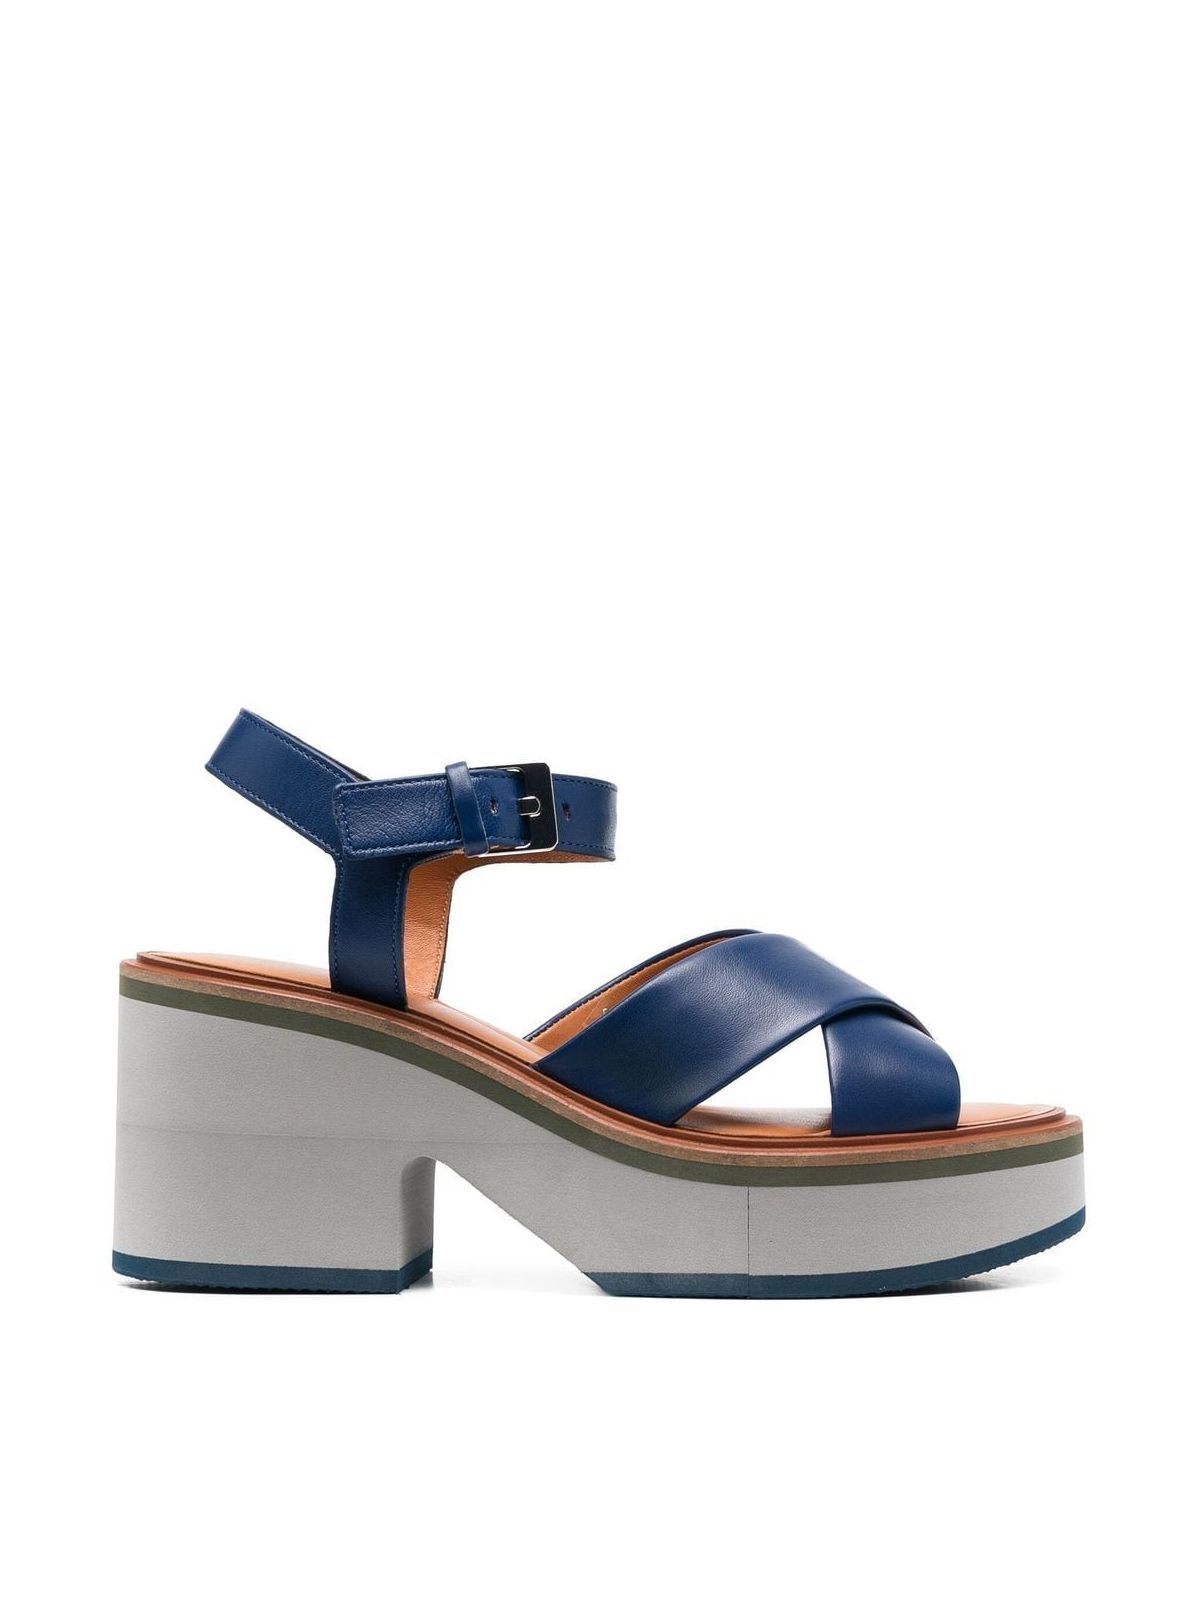 Shop Clergerie Women's Leather Sandals With Ankle Closure